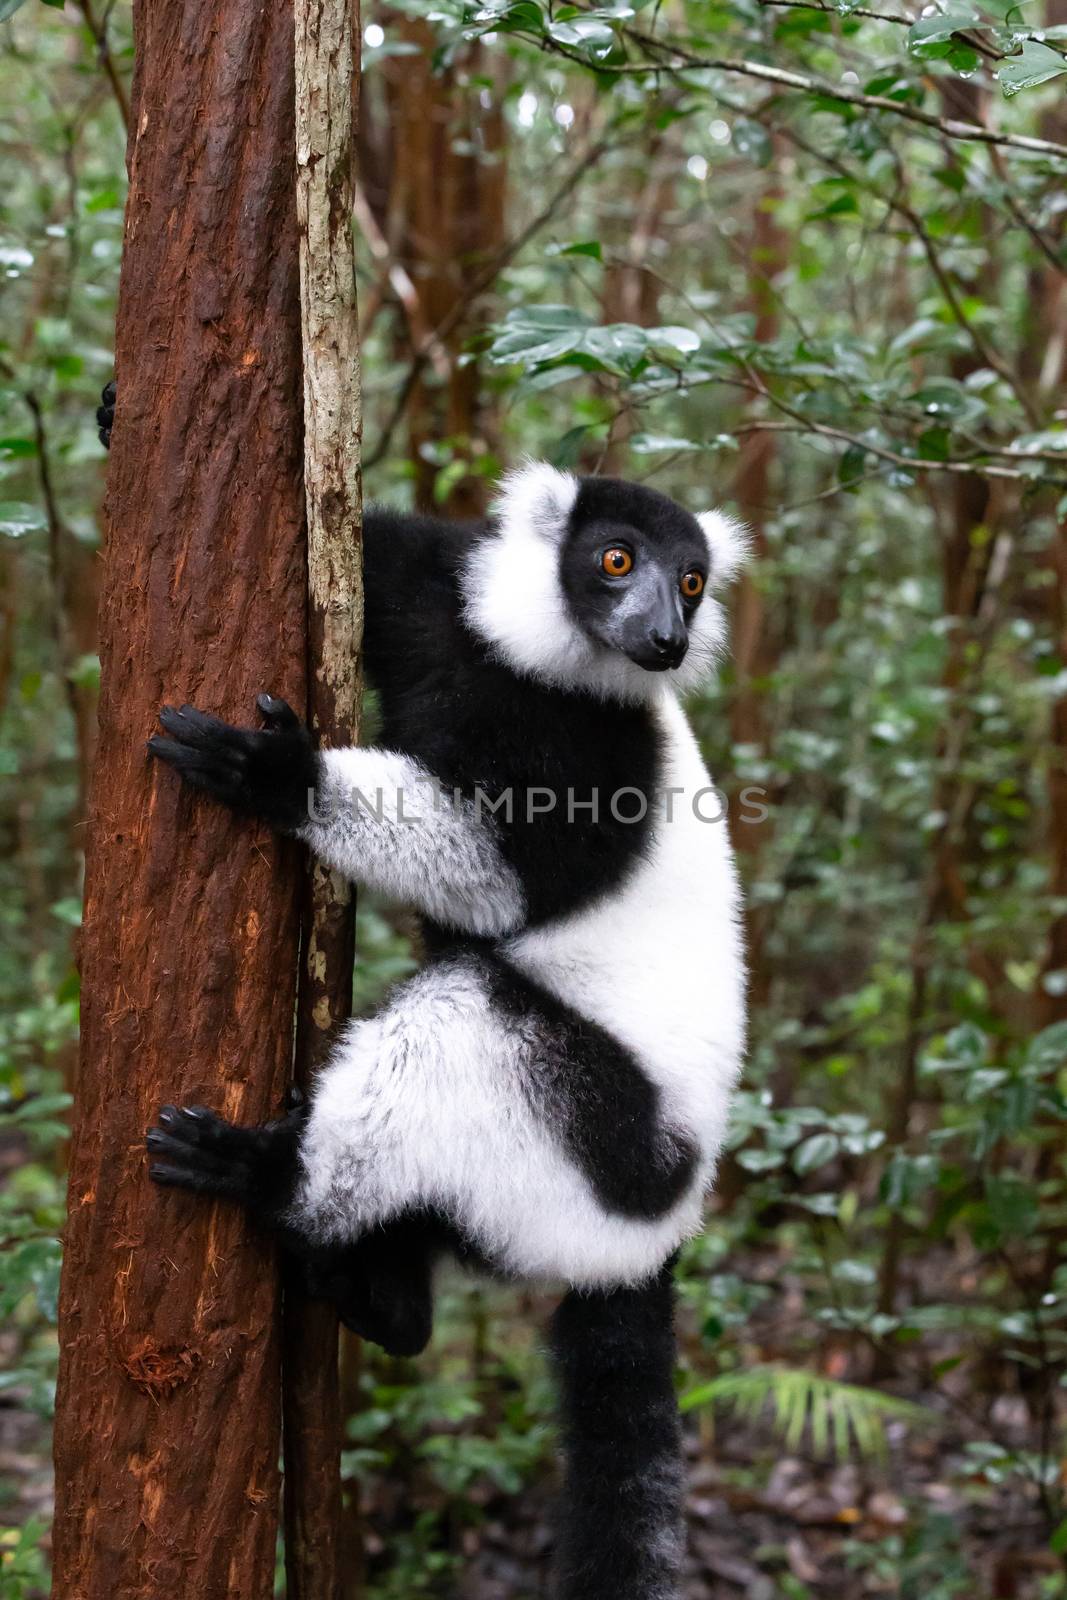 One black and white lemur sits on the branch of a tree